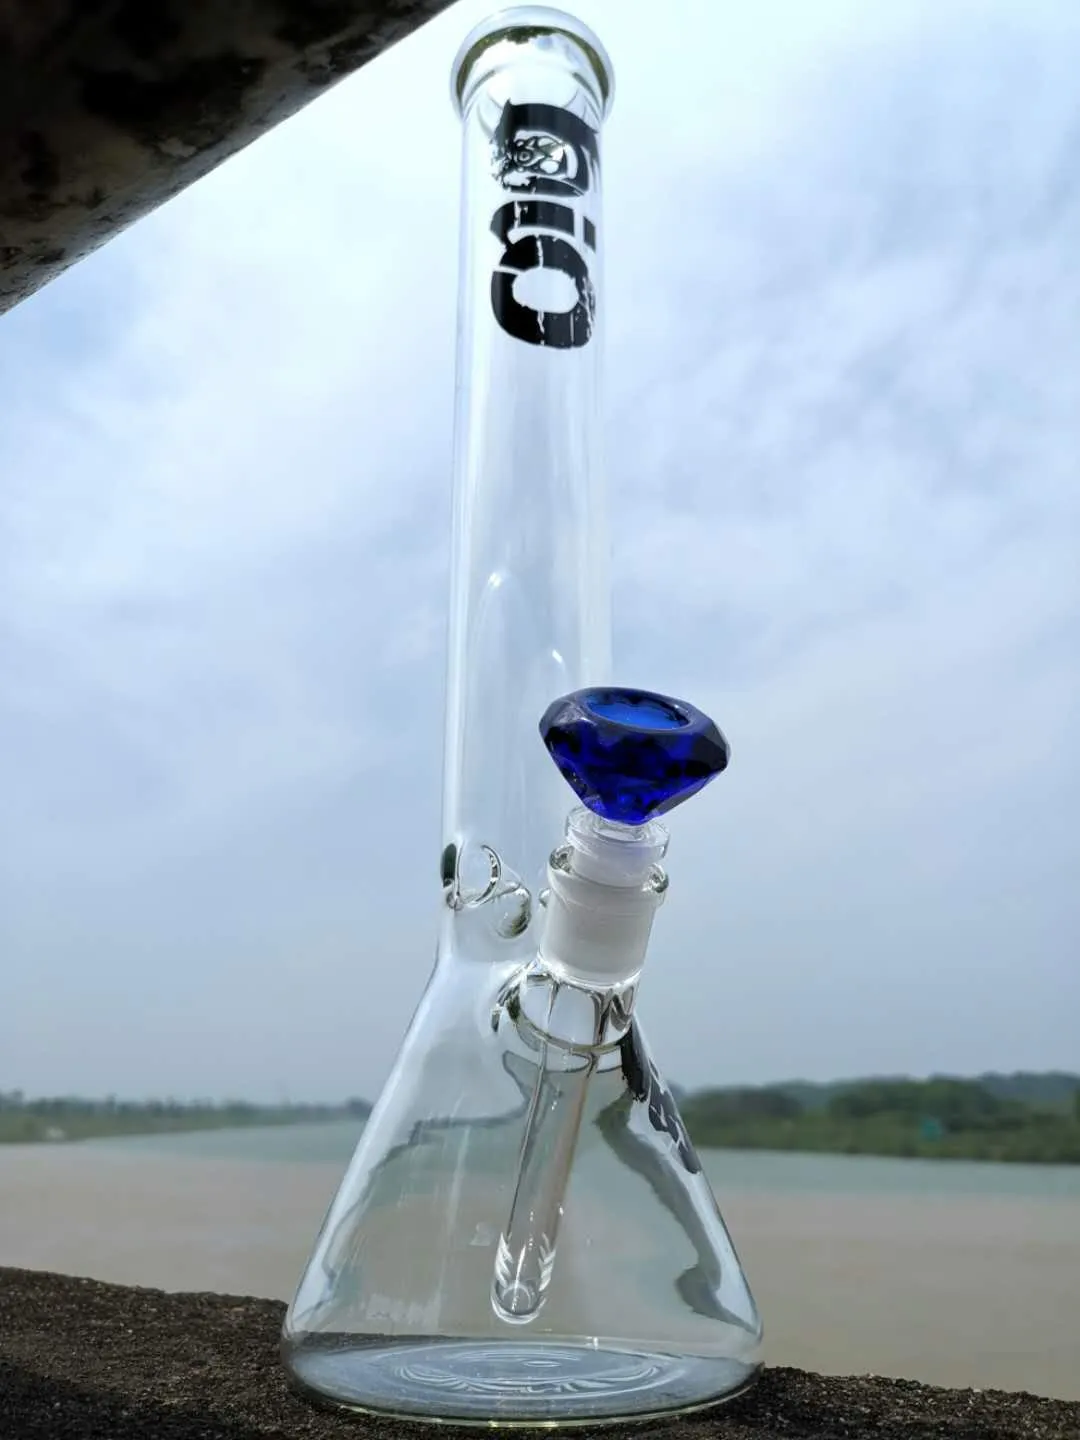 Stseshop 10 Inches Big Glass Bongs Beaker Bong Thick Glass Wall Super Heavy Water Pipes With Glass Bowl OR Quartz banger